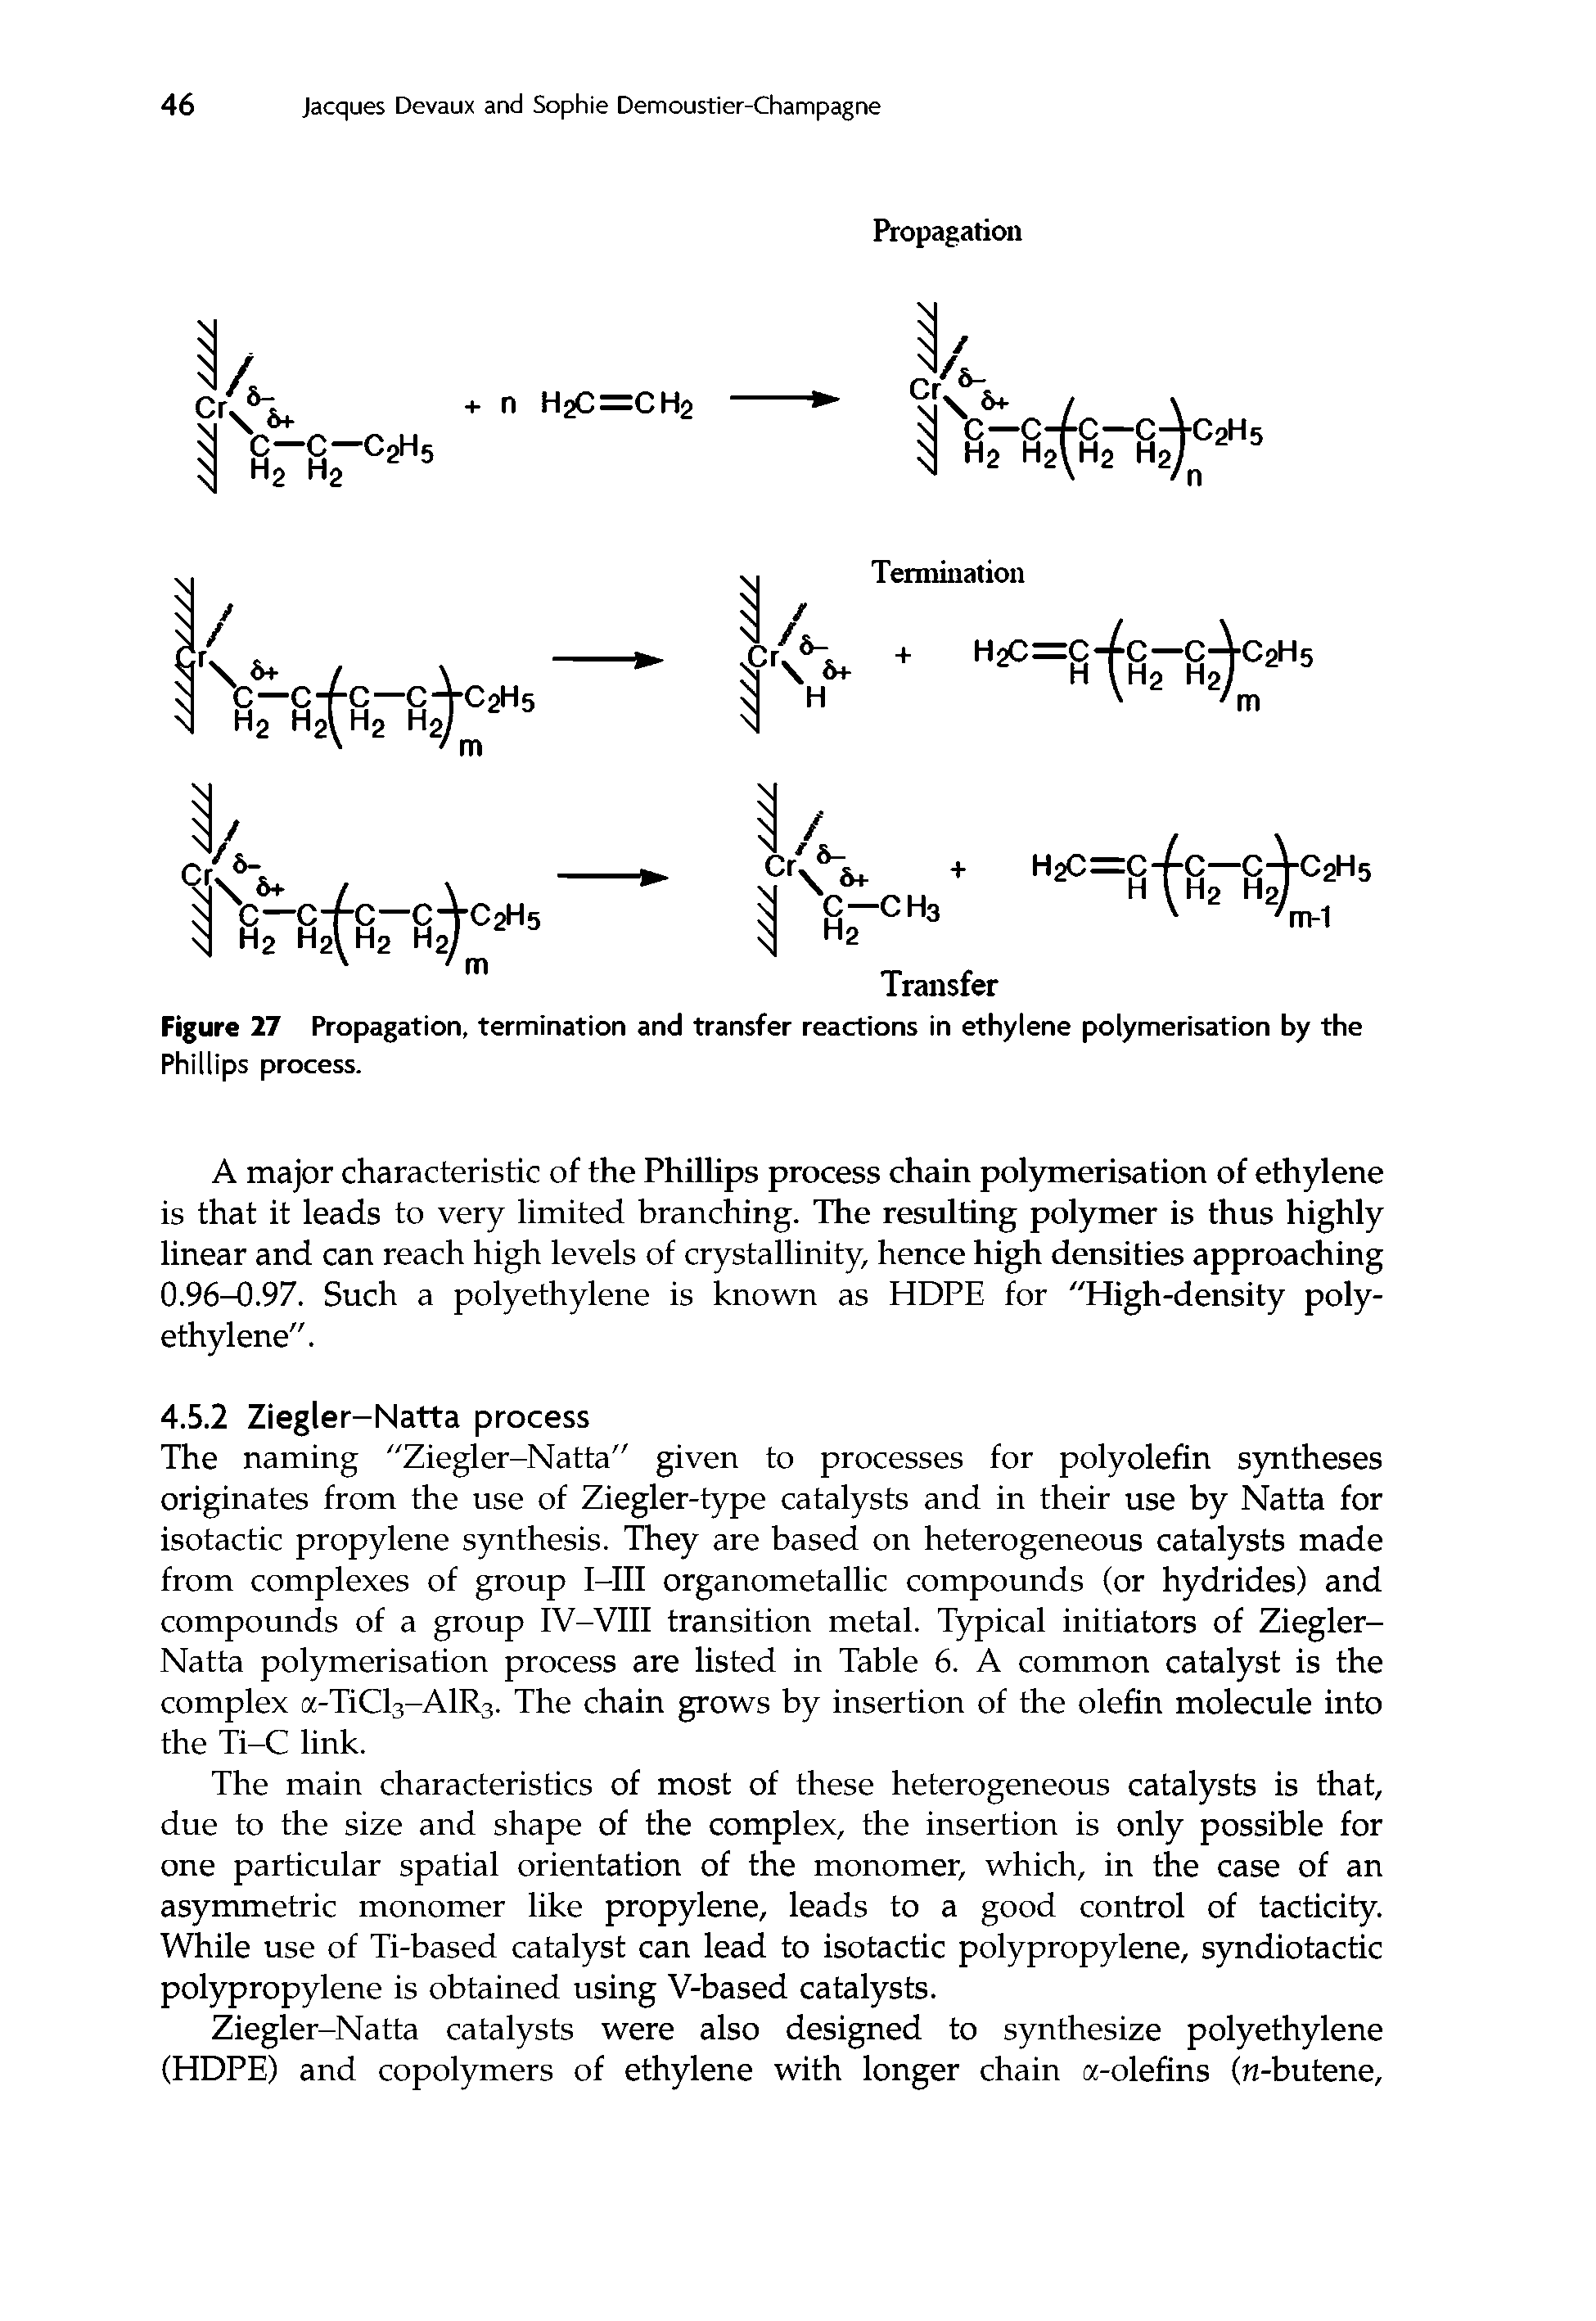 Figure 27 Propagation, termination and transfer reactions in ethylene polymerisation by the Phillips process.